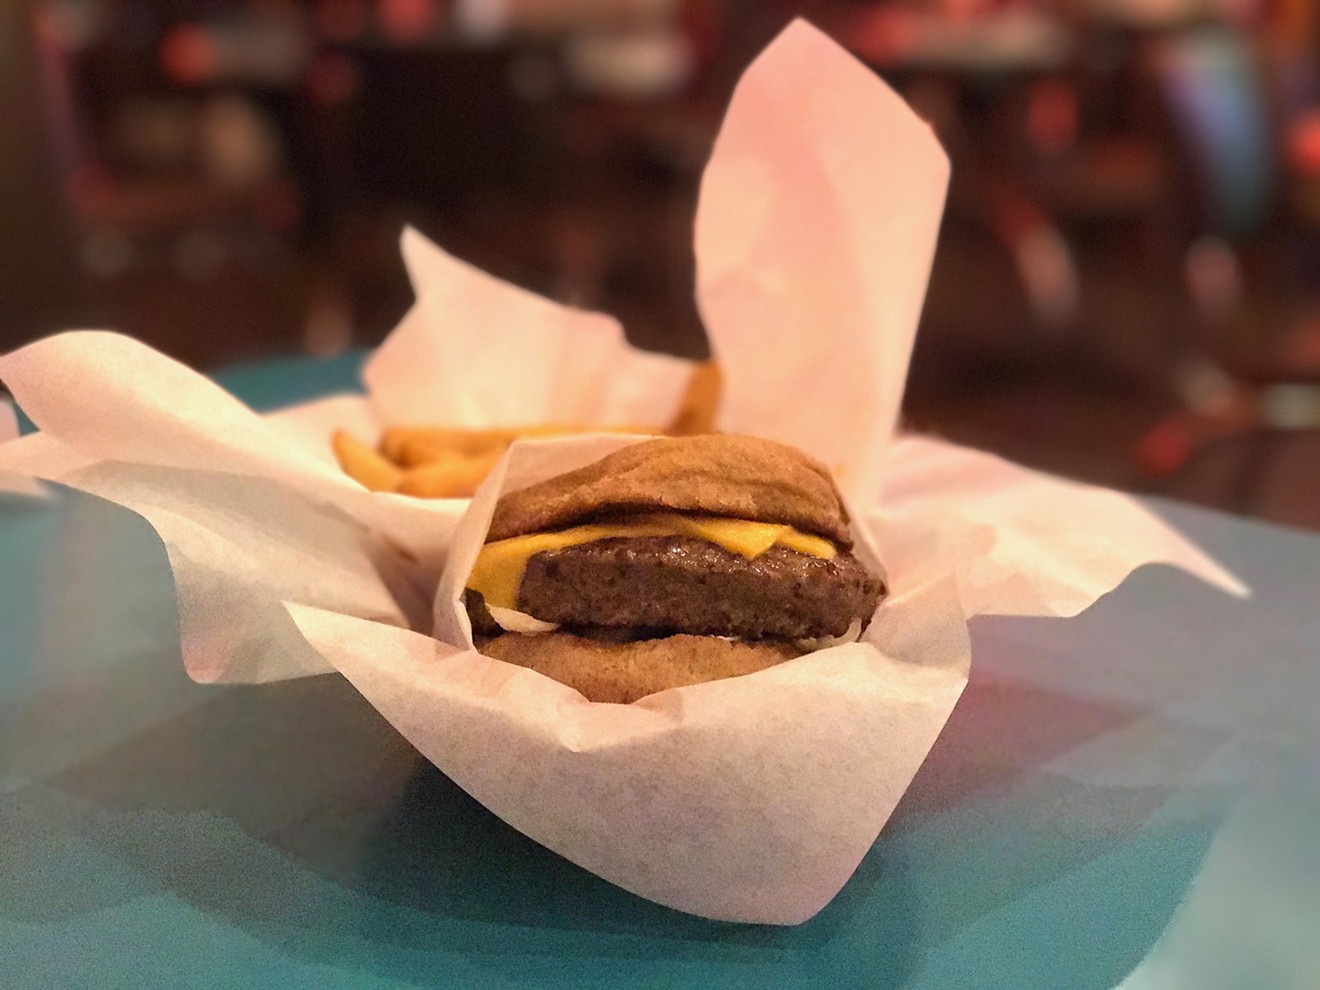 One of the city's best grass-fed burgers is served by Hunky's. Who knew?